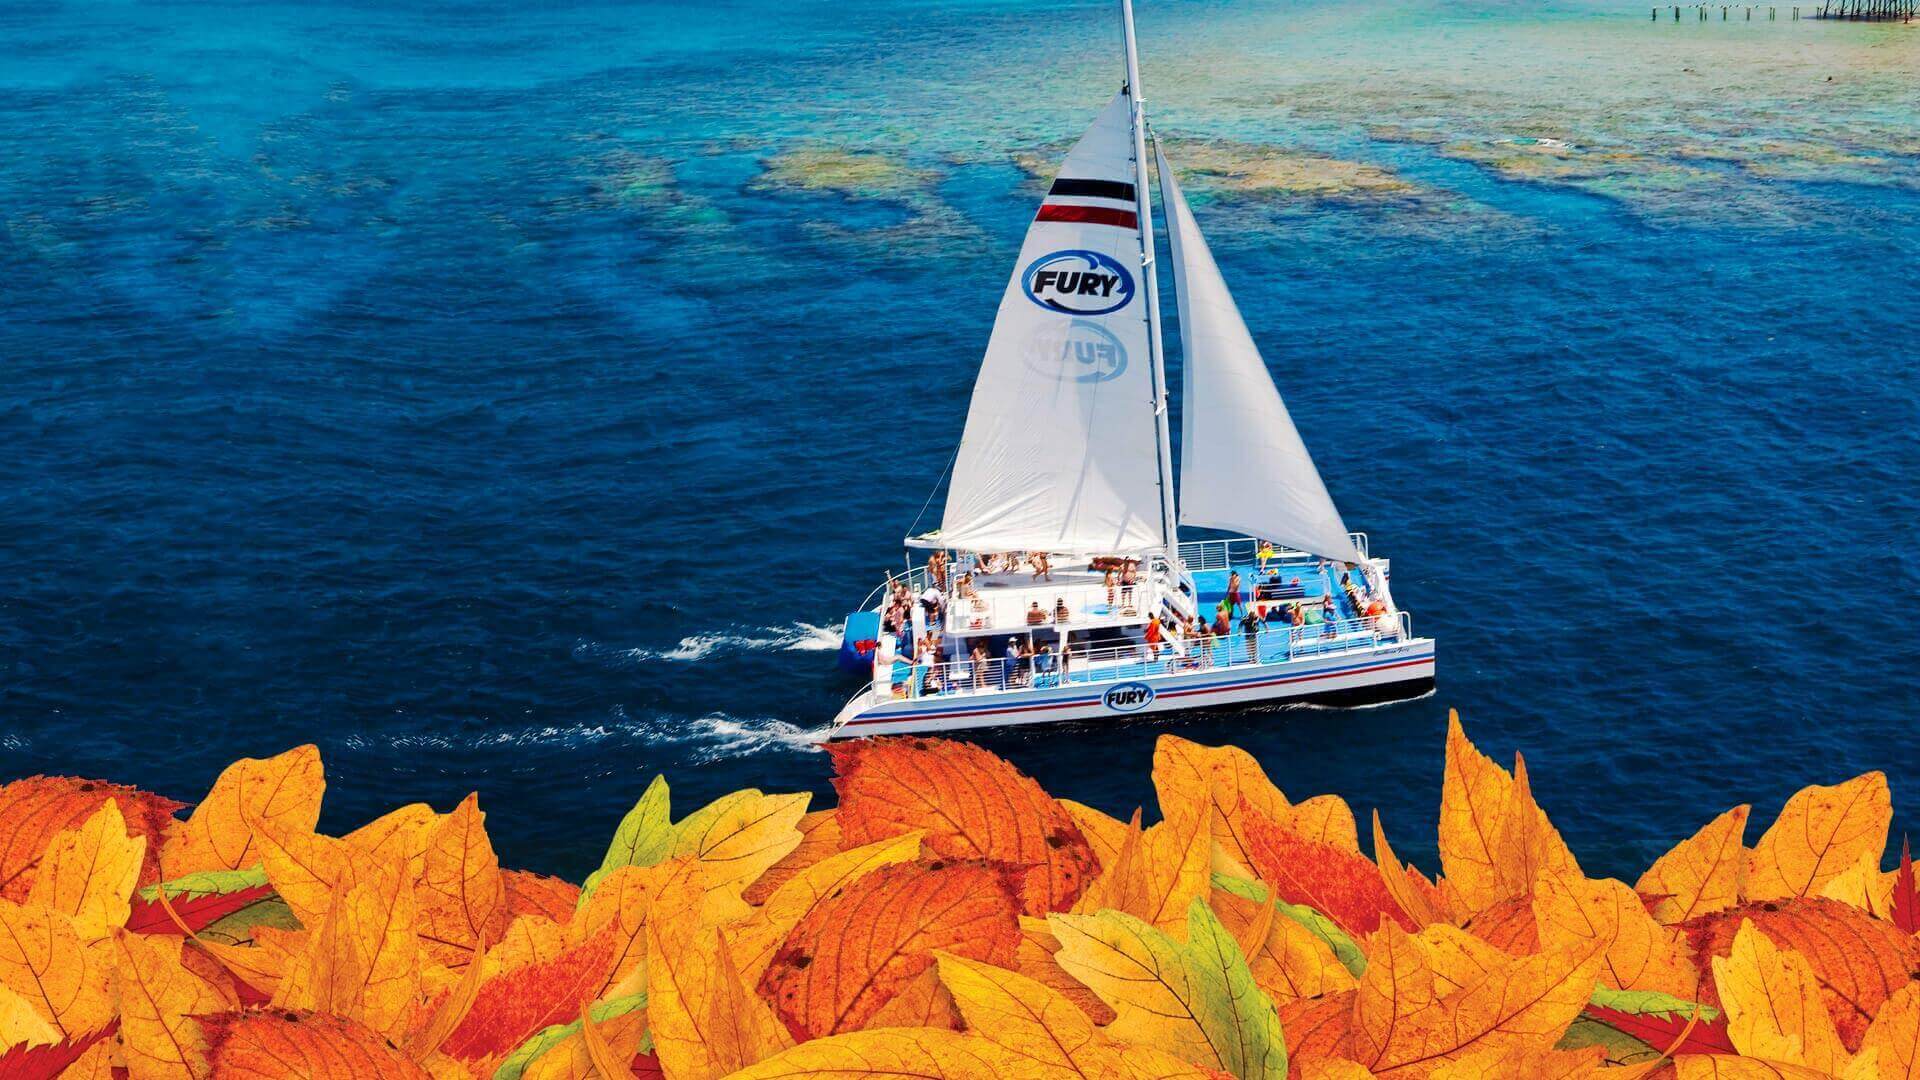 Thanksgiving sailboat on the ocean